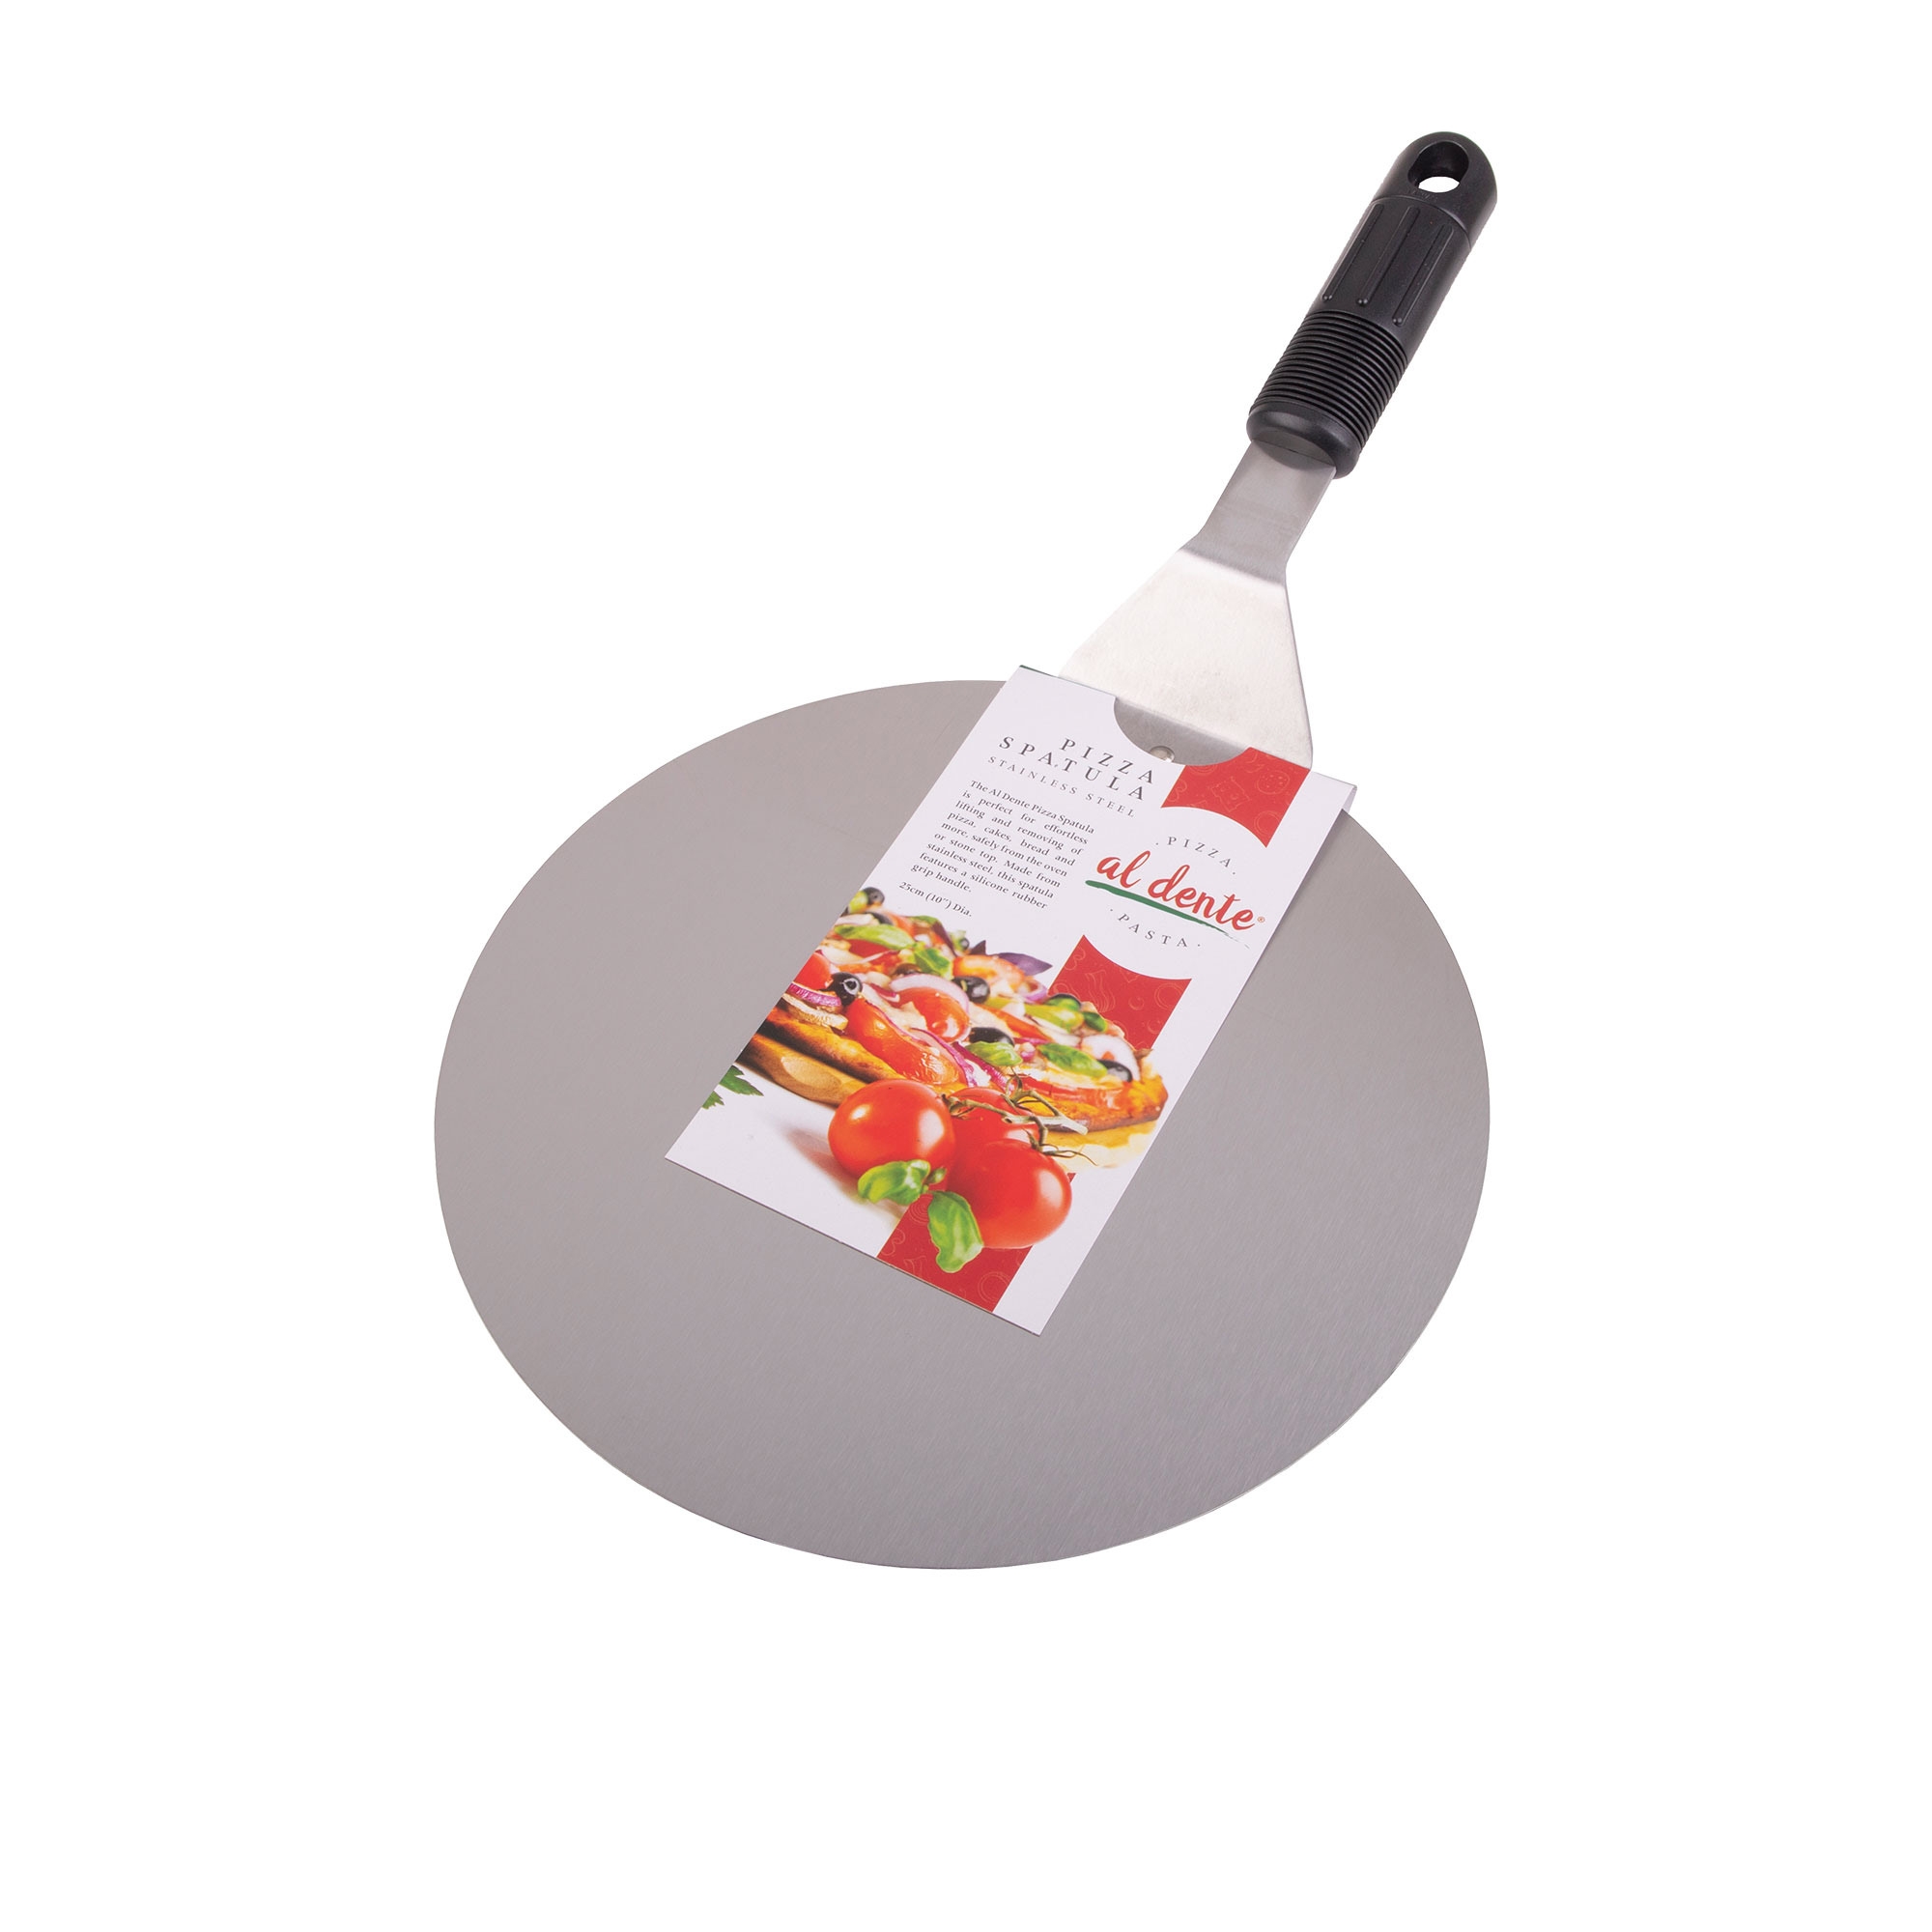 Al Dente Stainless Steel Pizza Lifter 25cm Image 2